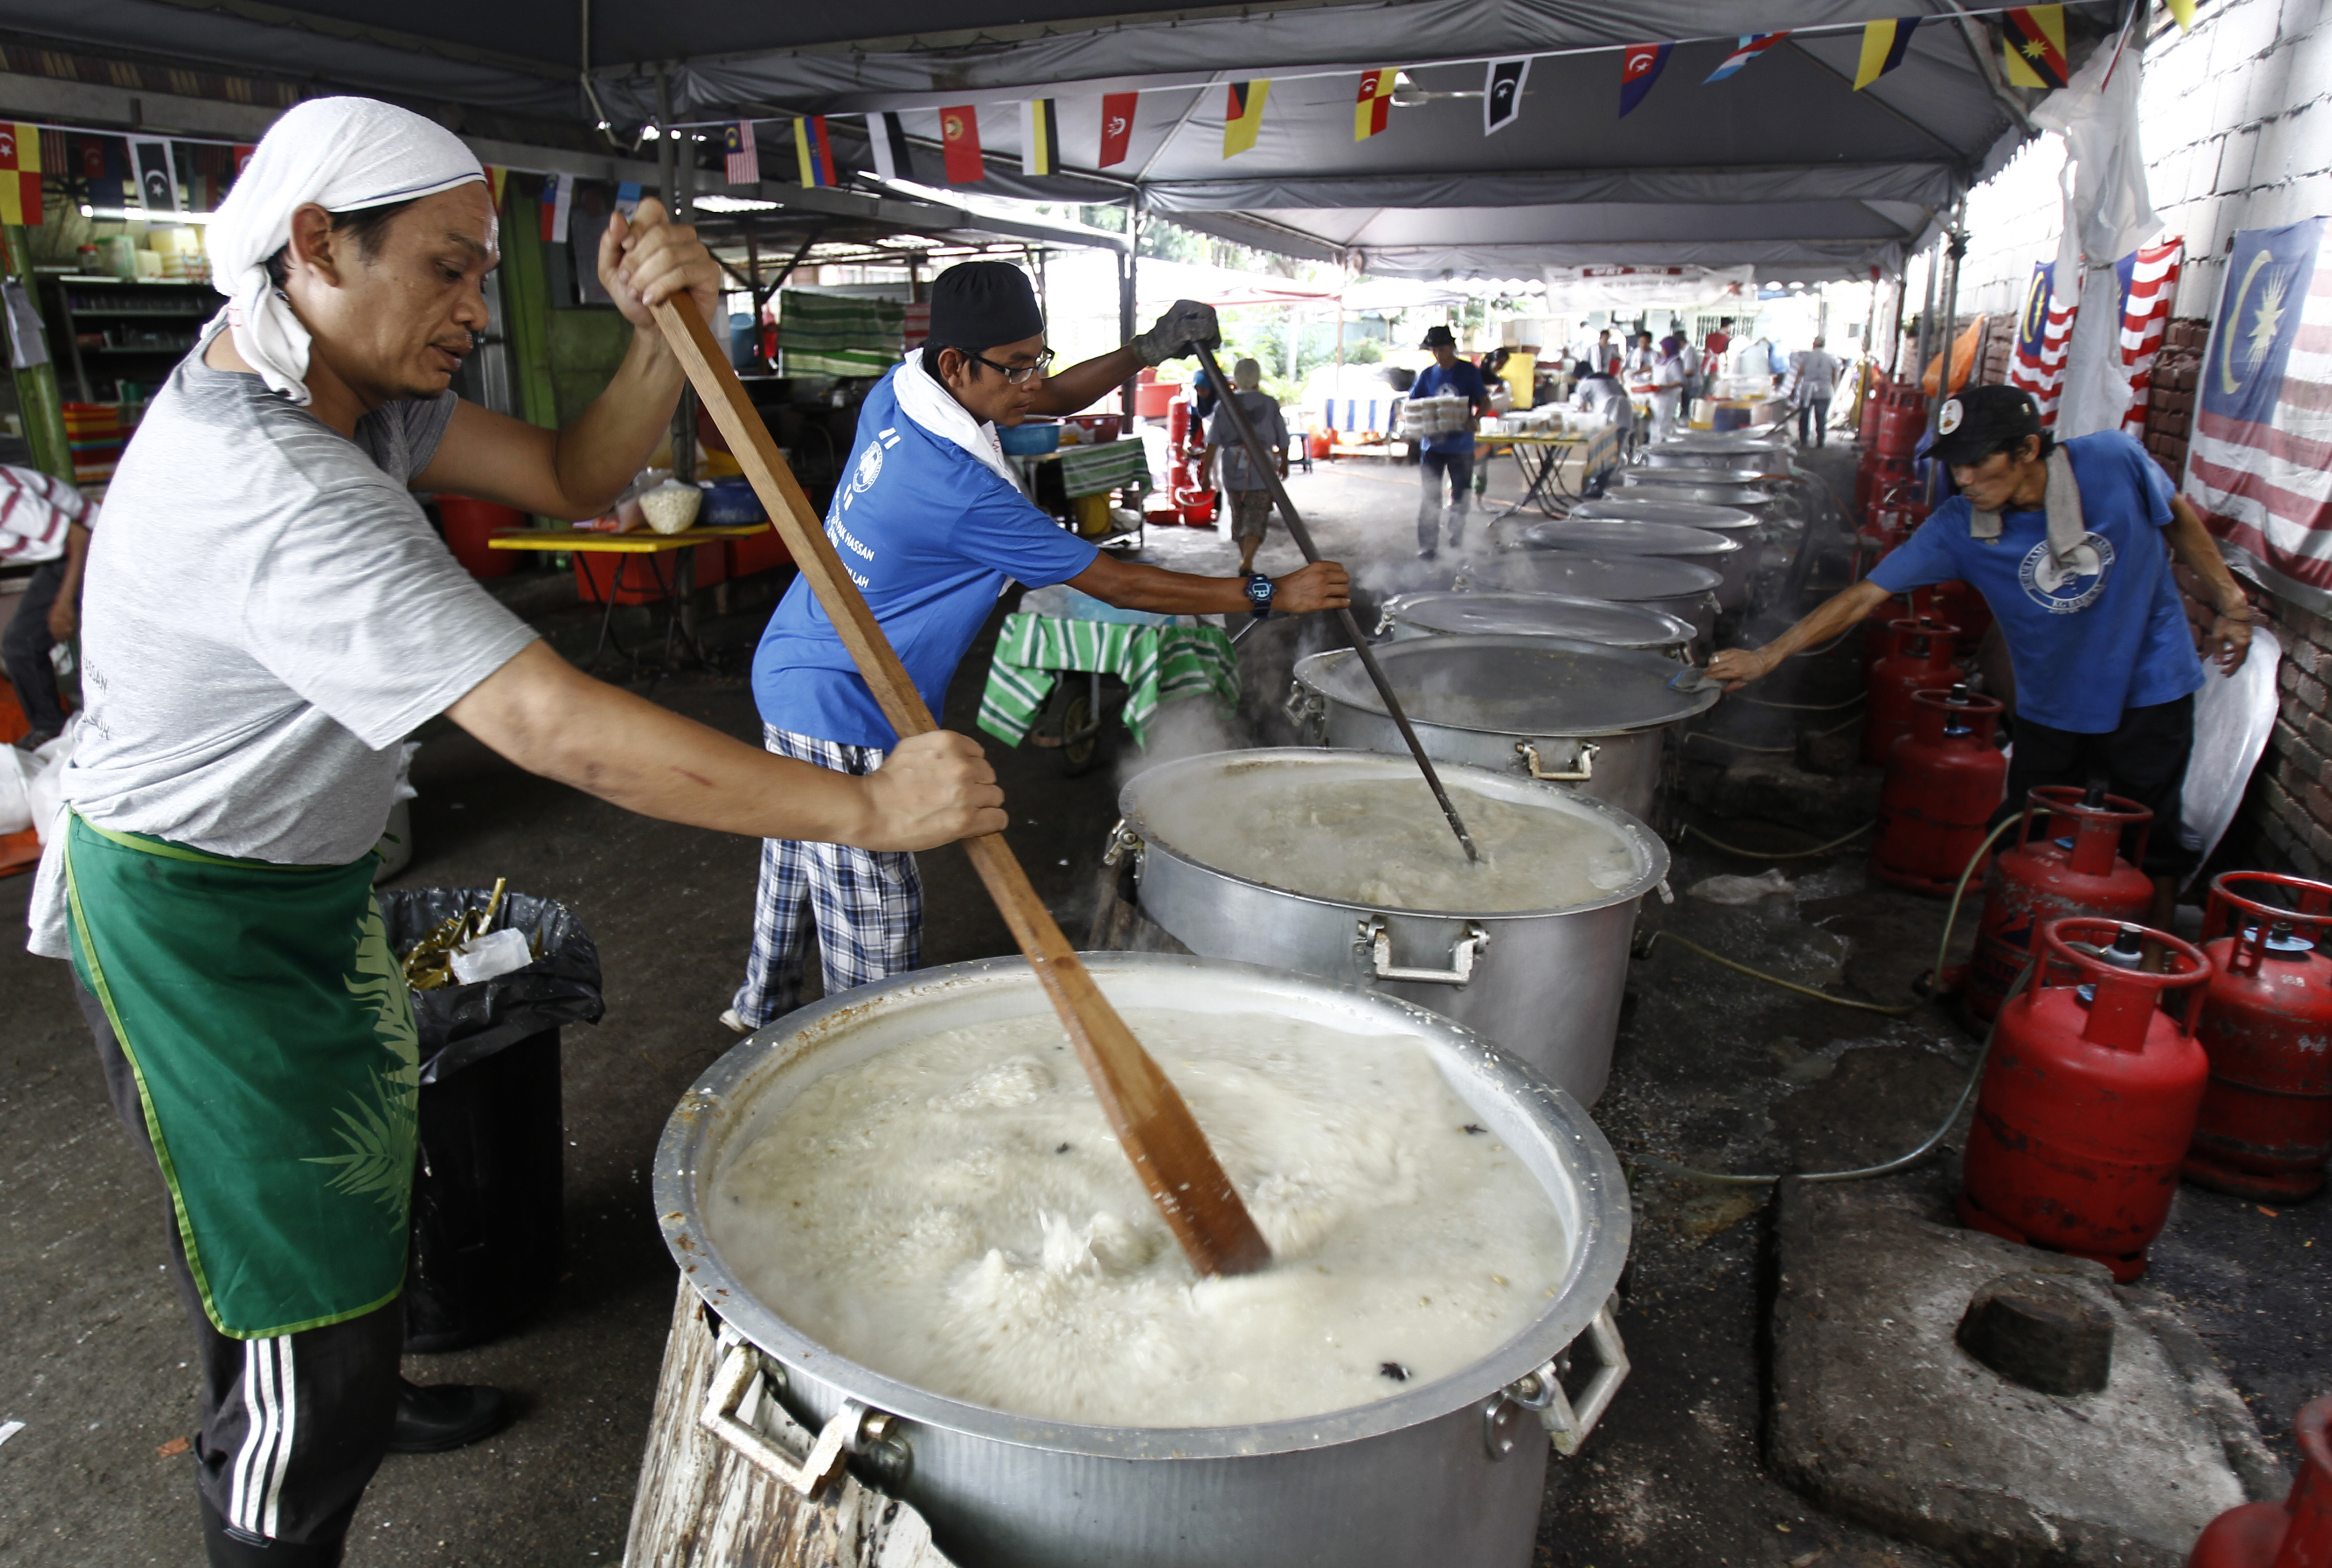 Malaysian Muslims cook large pots of Bubur Lambuk porridge in the Kampung Baru village in Kuala Lumpur, Malaysia on Thursday, June 1, 2017. Bubur Lambuk is a type of Malay rice porridge that is cooked and distributed in many places during the fasting month of Ramadan. (AP Photo/Daniel Chan)